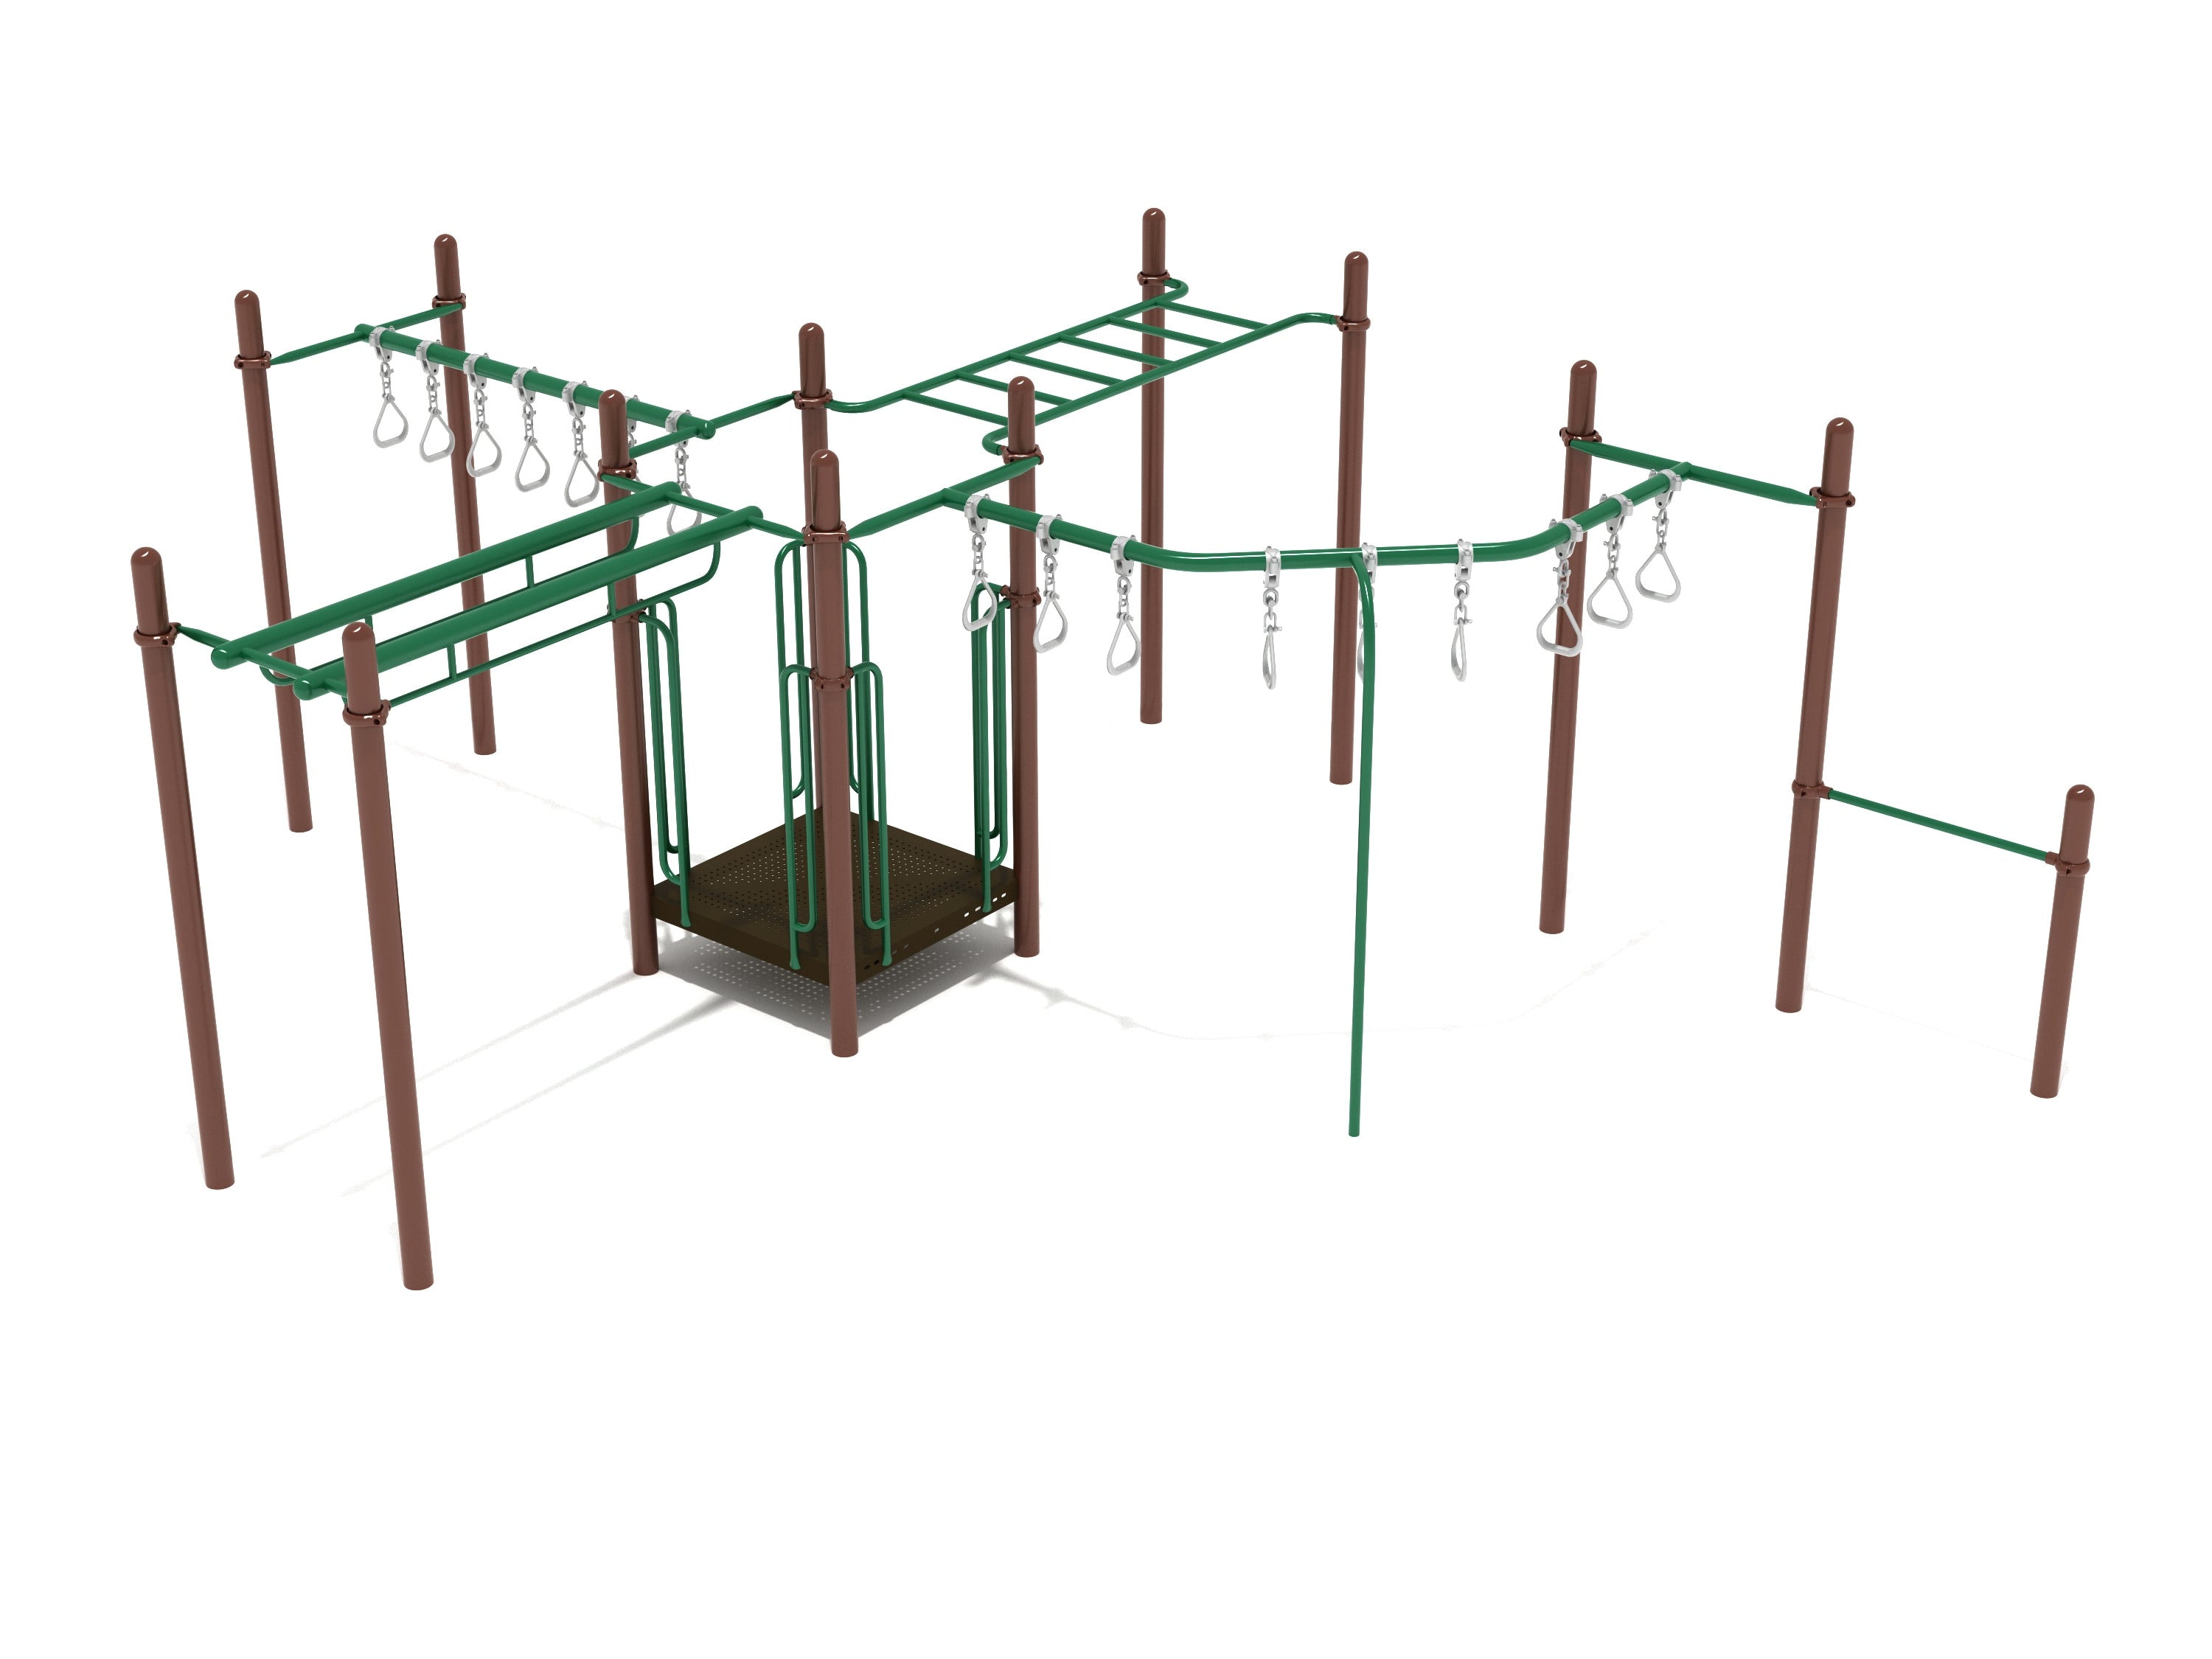 San Mateo Fitness Playground Neutral Colors